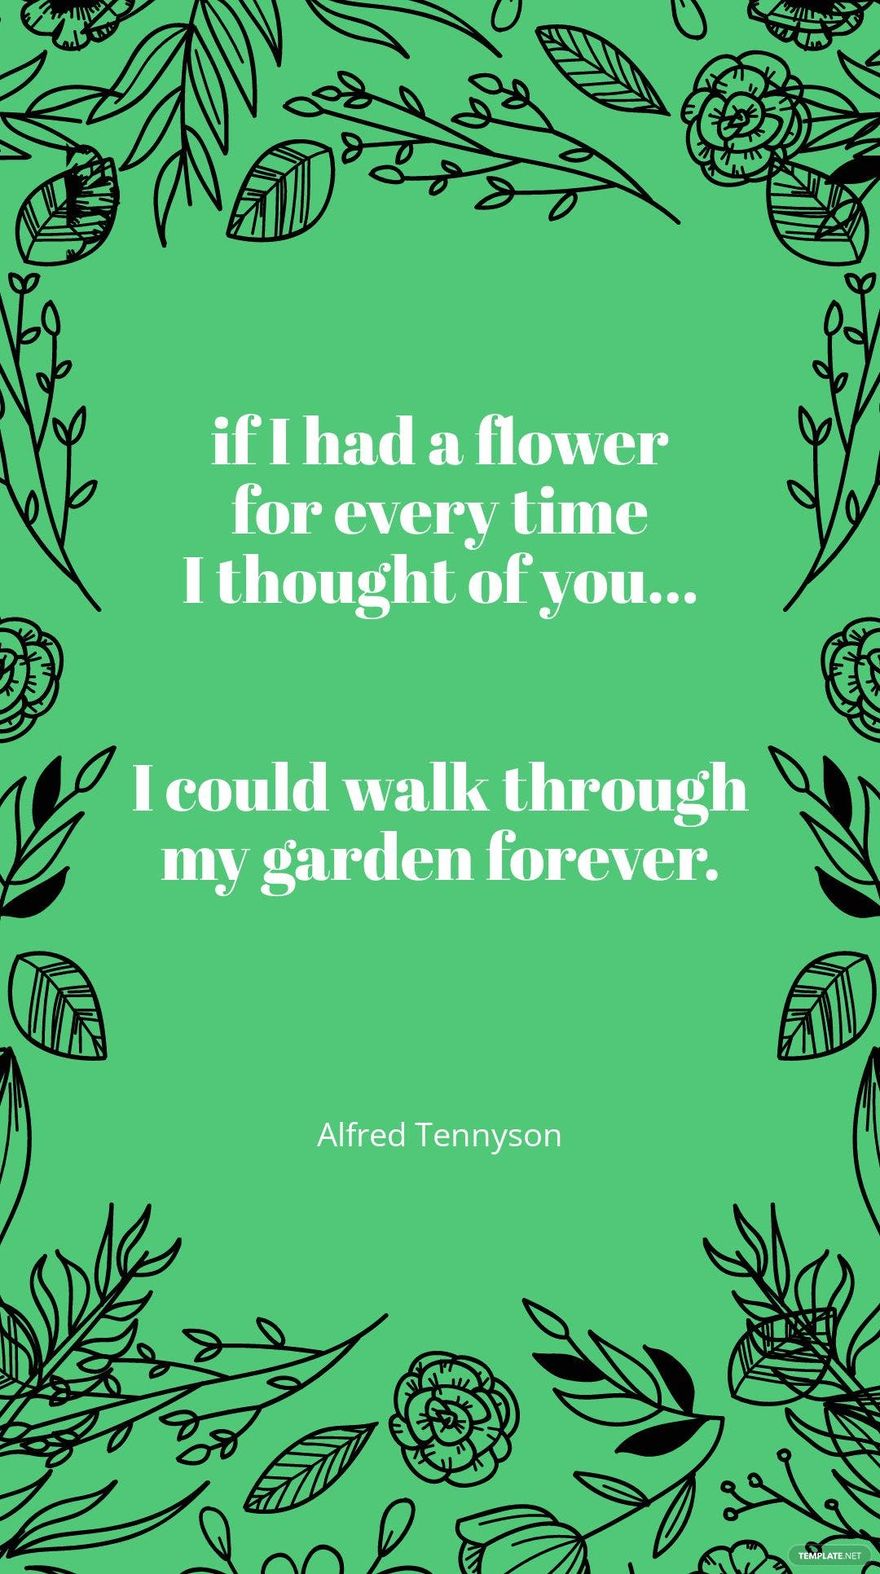 Alfred Tennyson - “If I had a flower for every time I thought of you… I could walk through my garden forever.” 